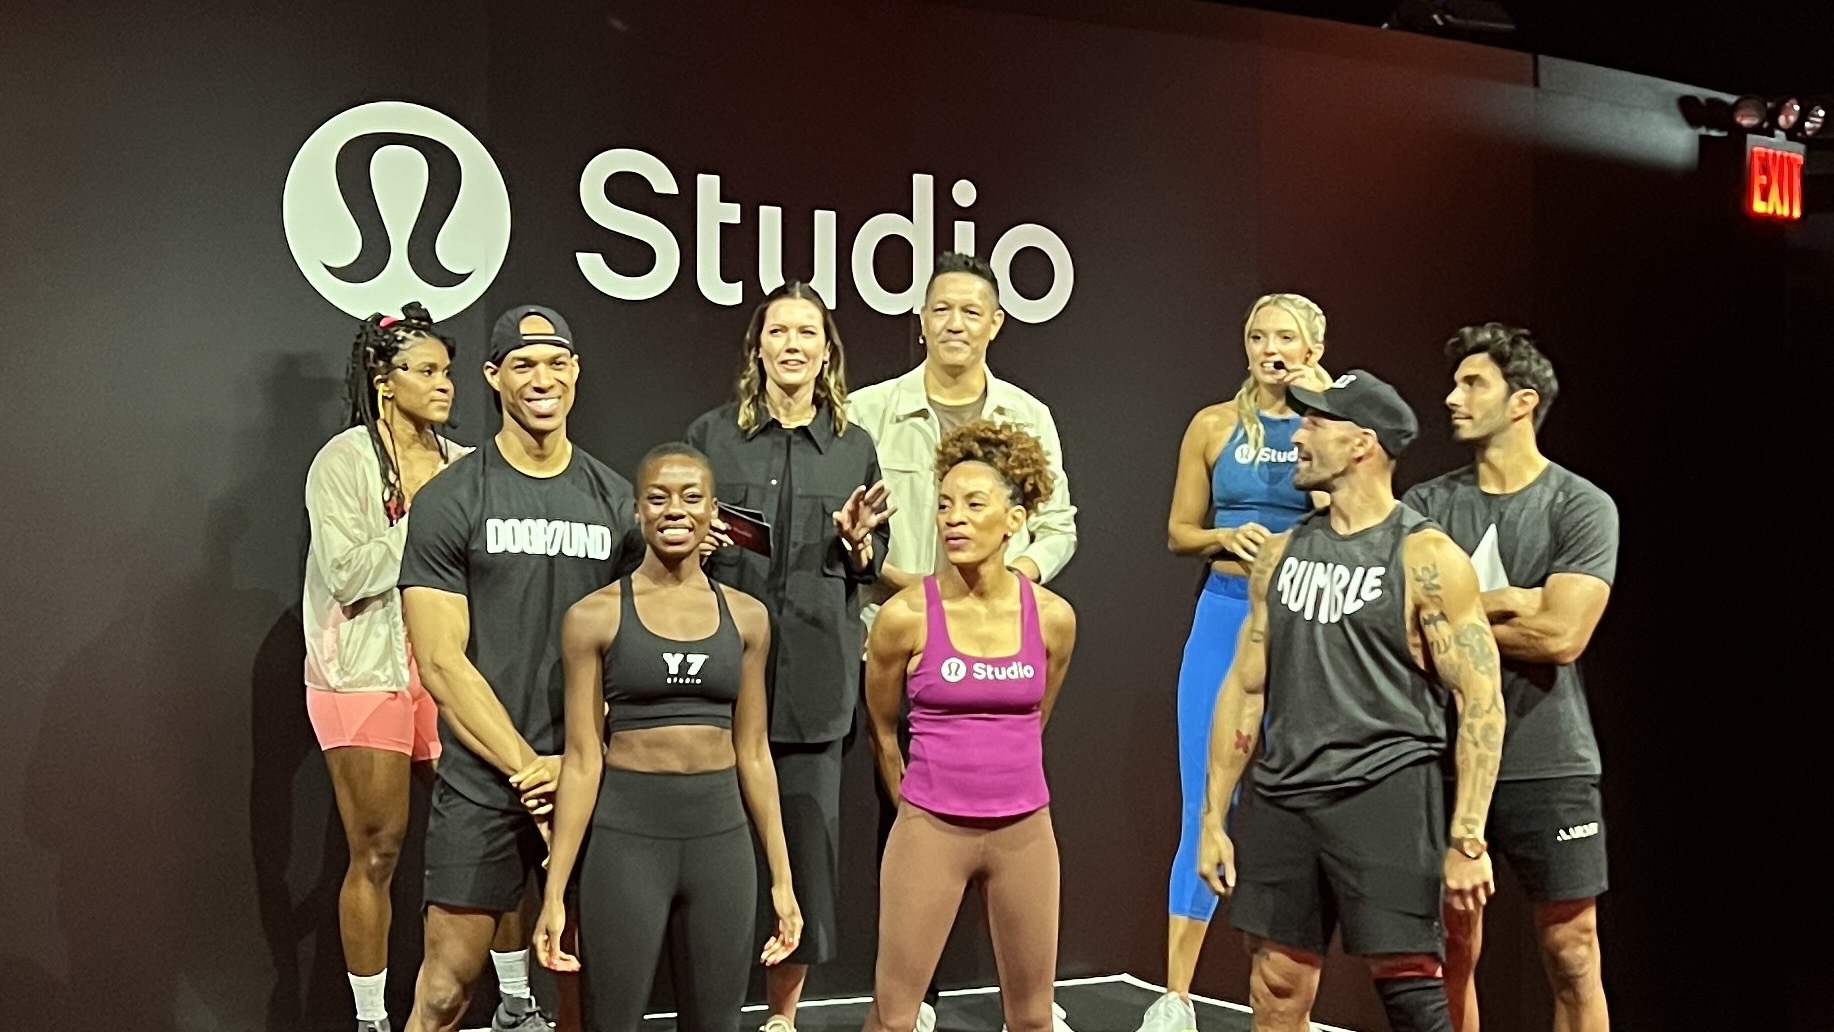 Lululemon Studio — price, membership perks and what it means for